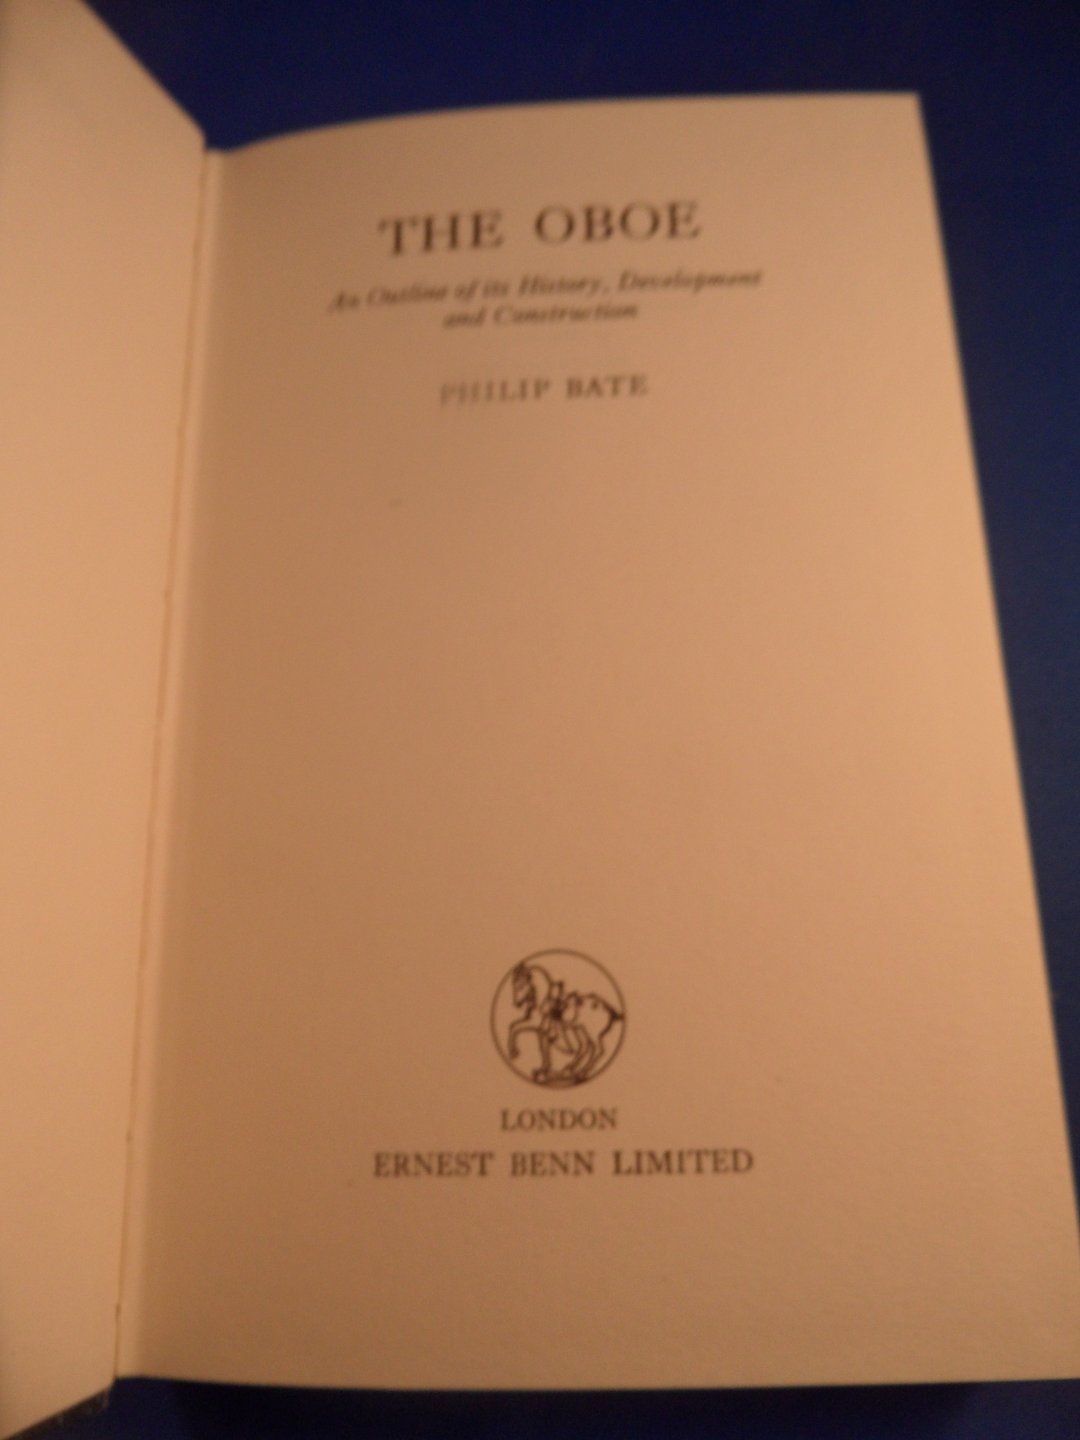 Bate, Philip - The Oboe, an outline of its history, development and construction